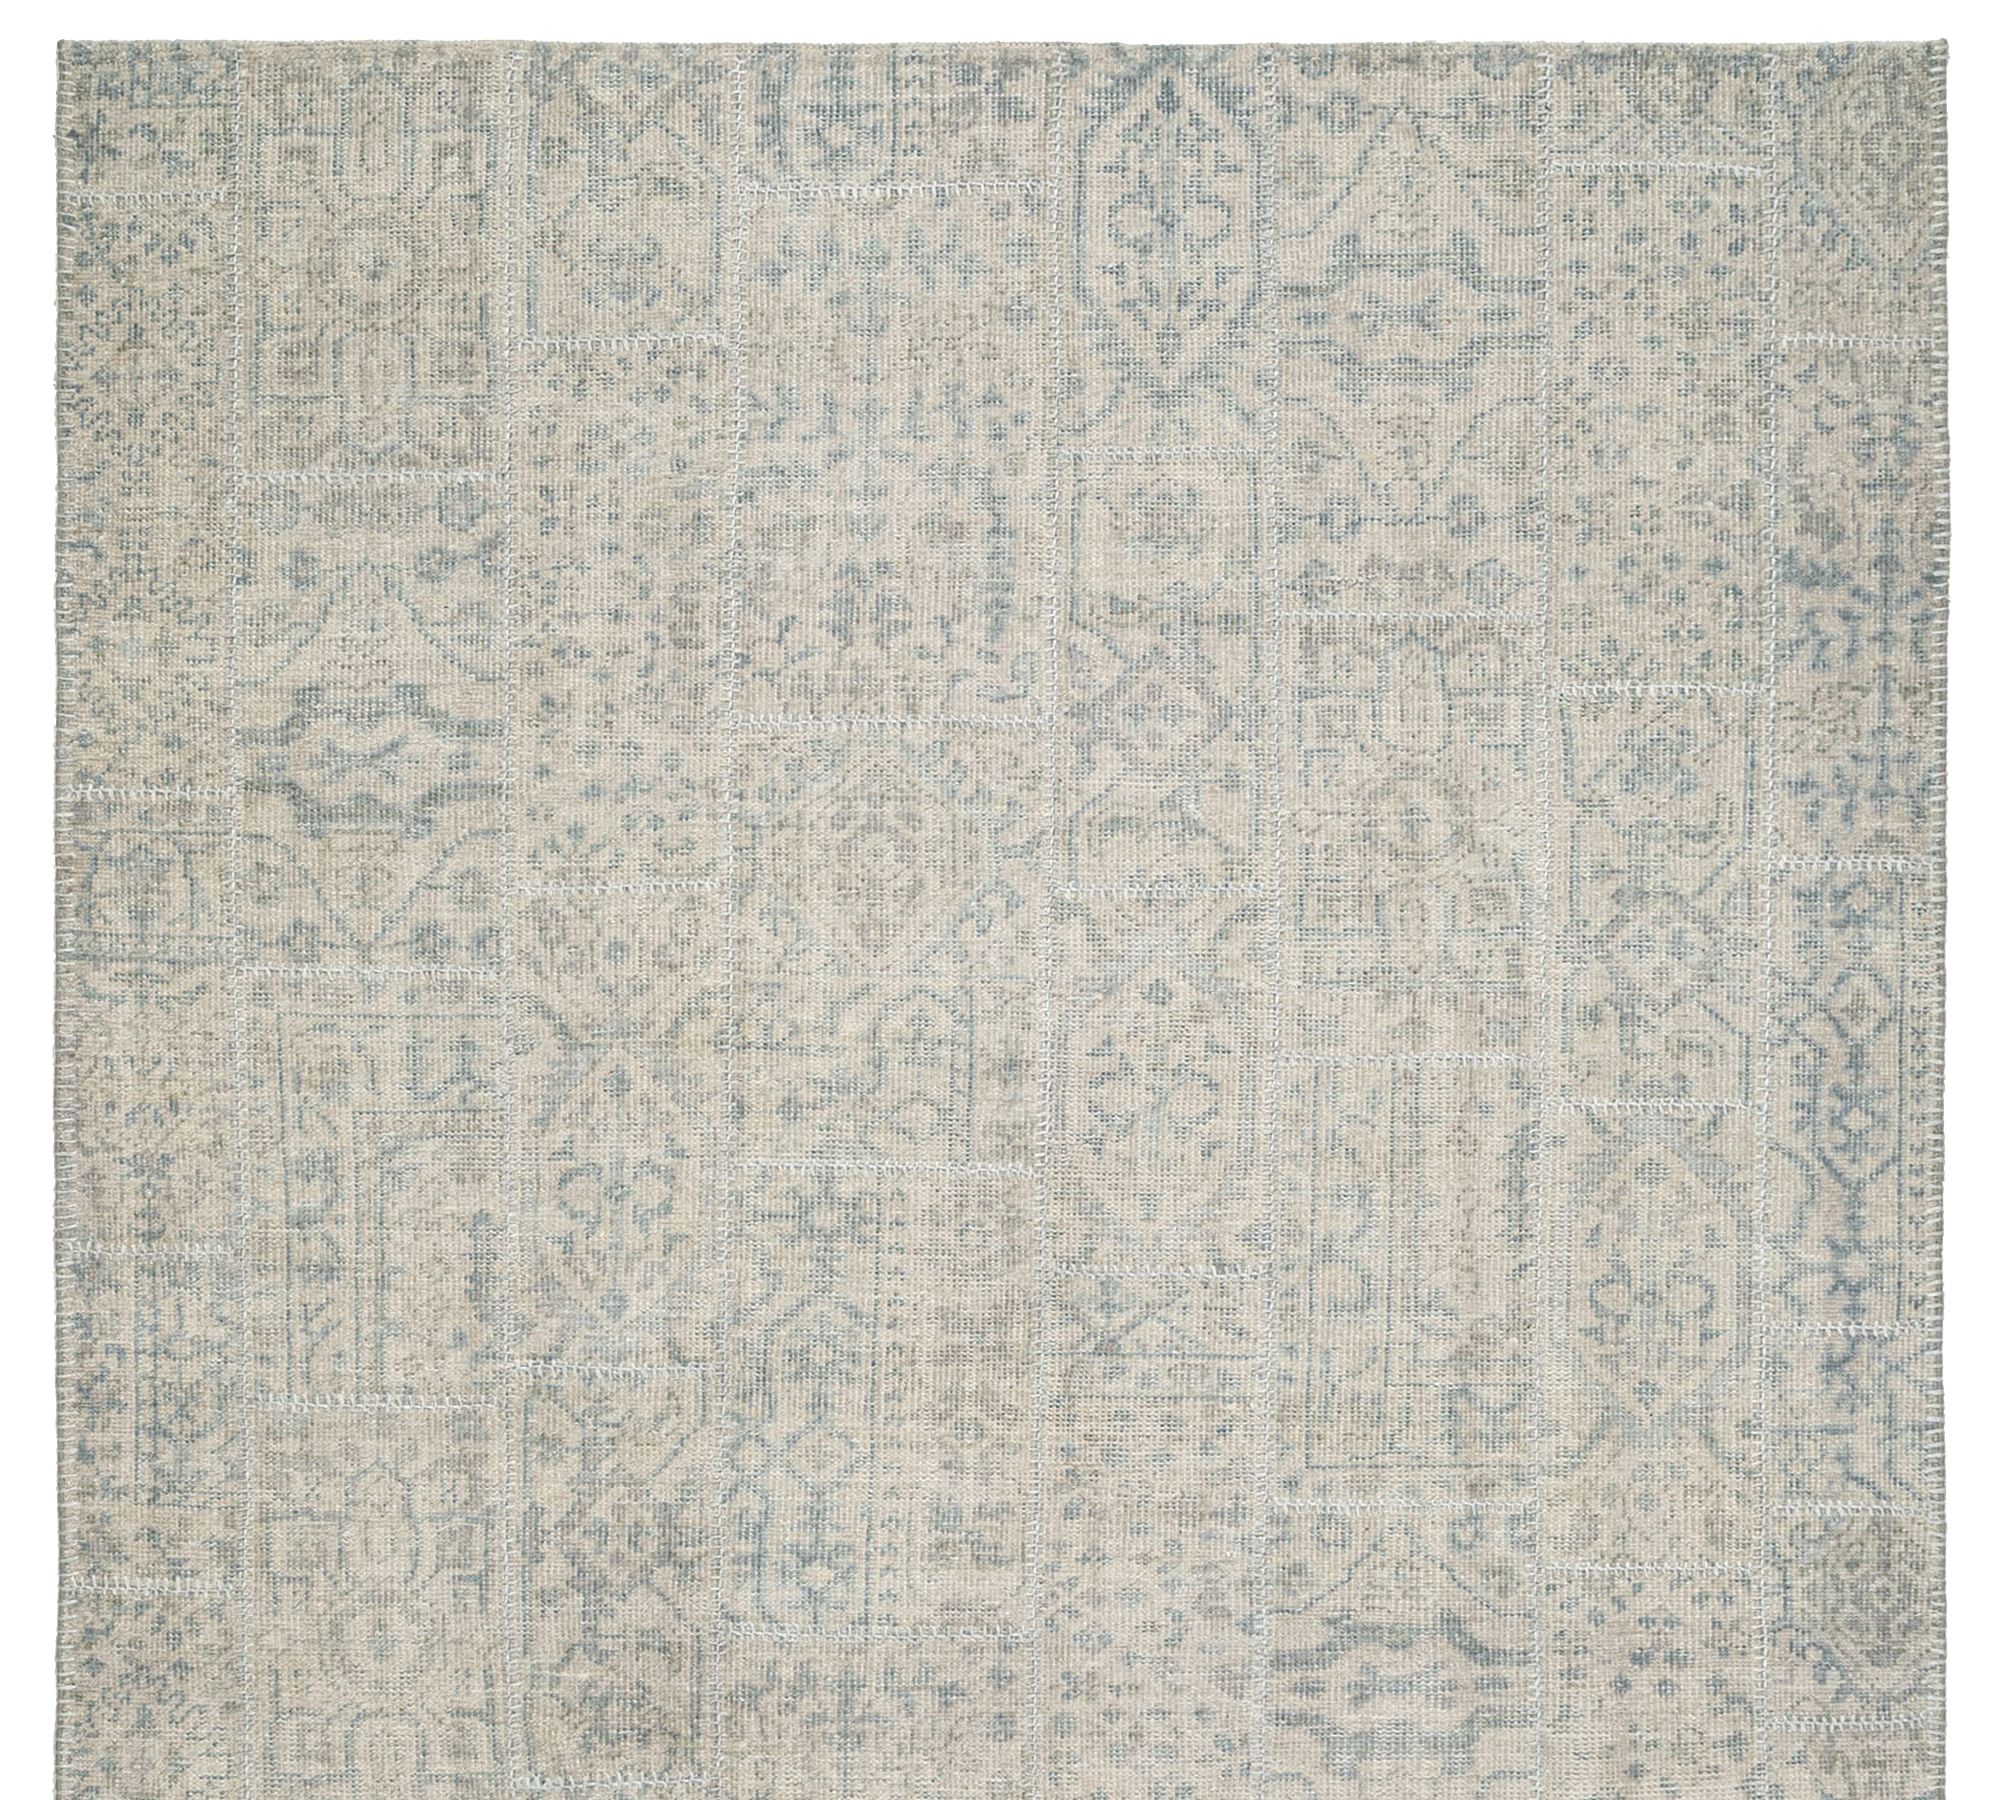 Blanc Hand-Knotted Faux Patchwork Rug